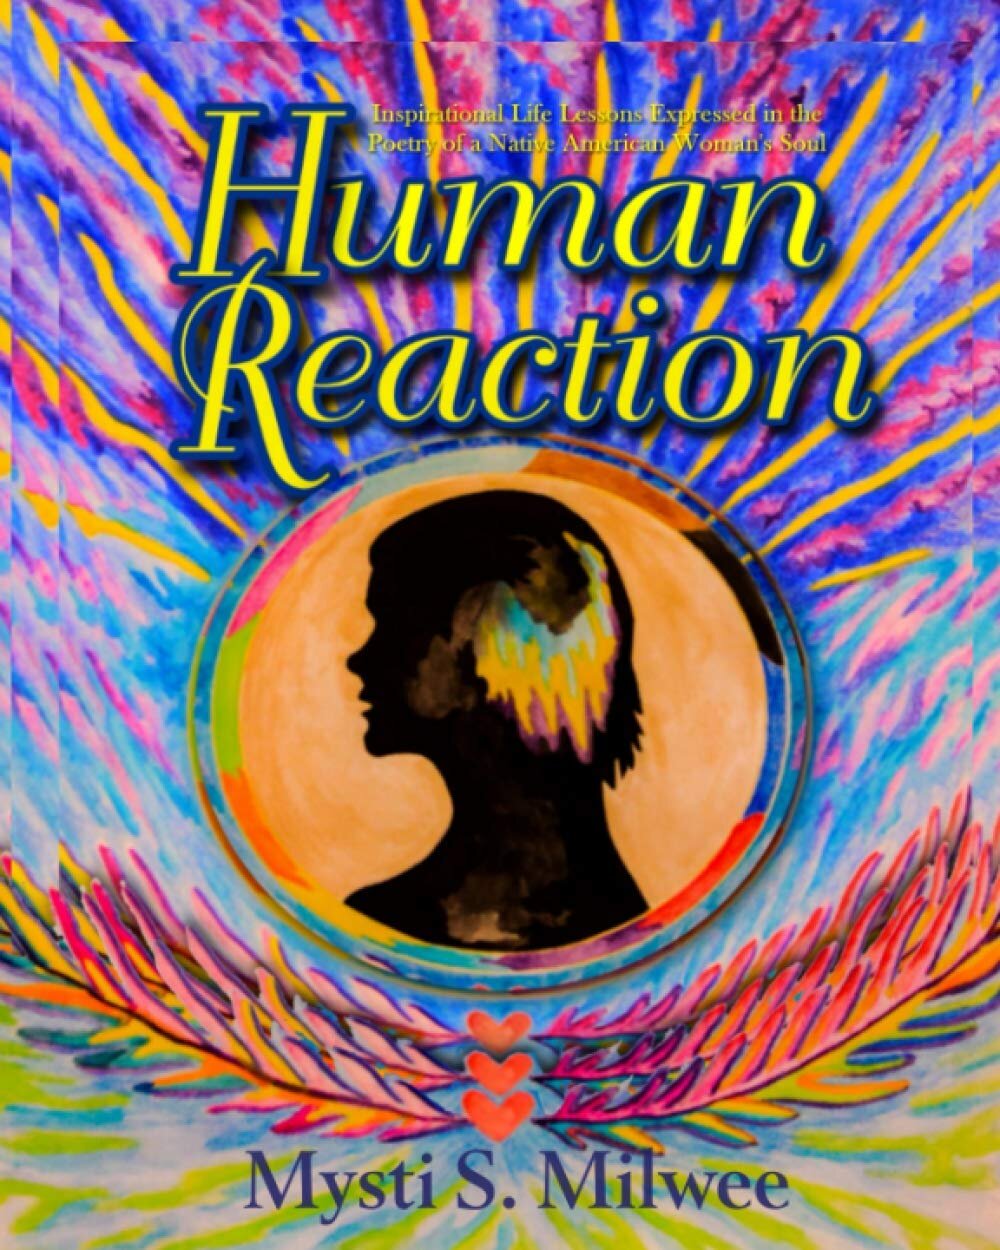 HUMAN REACTION by Mysti S. Milwee